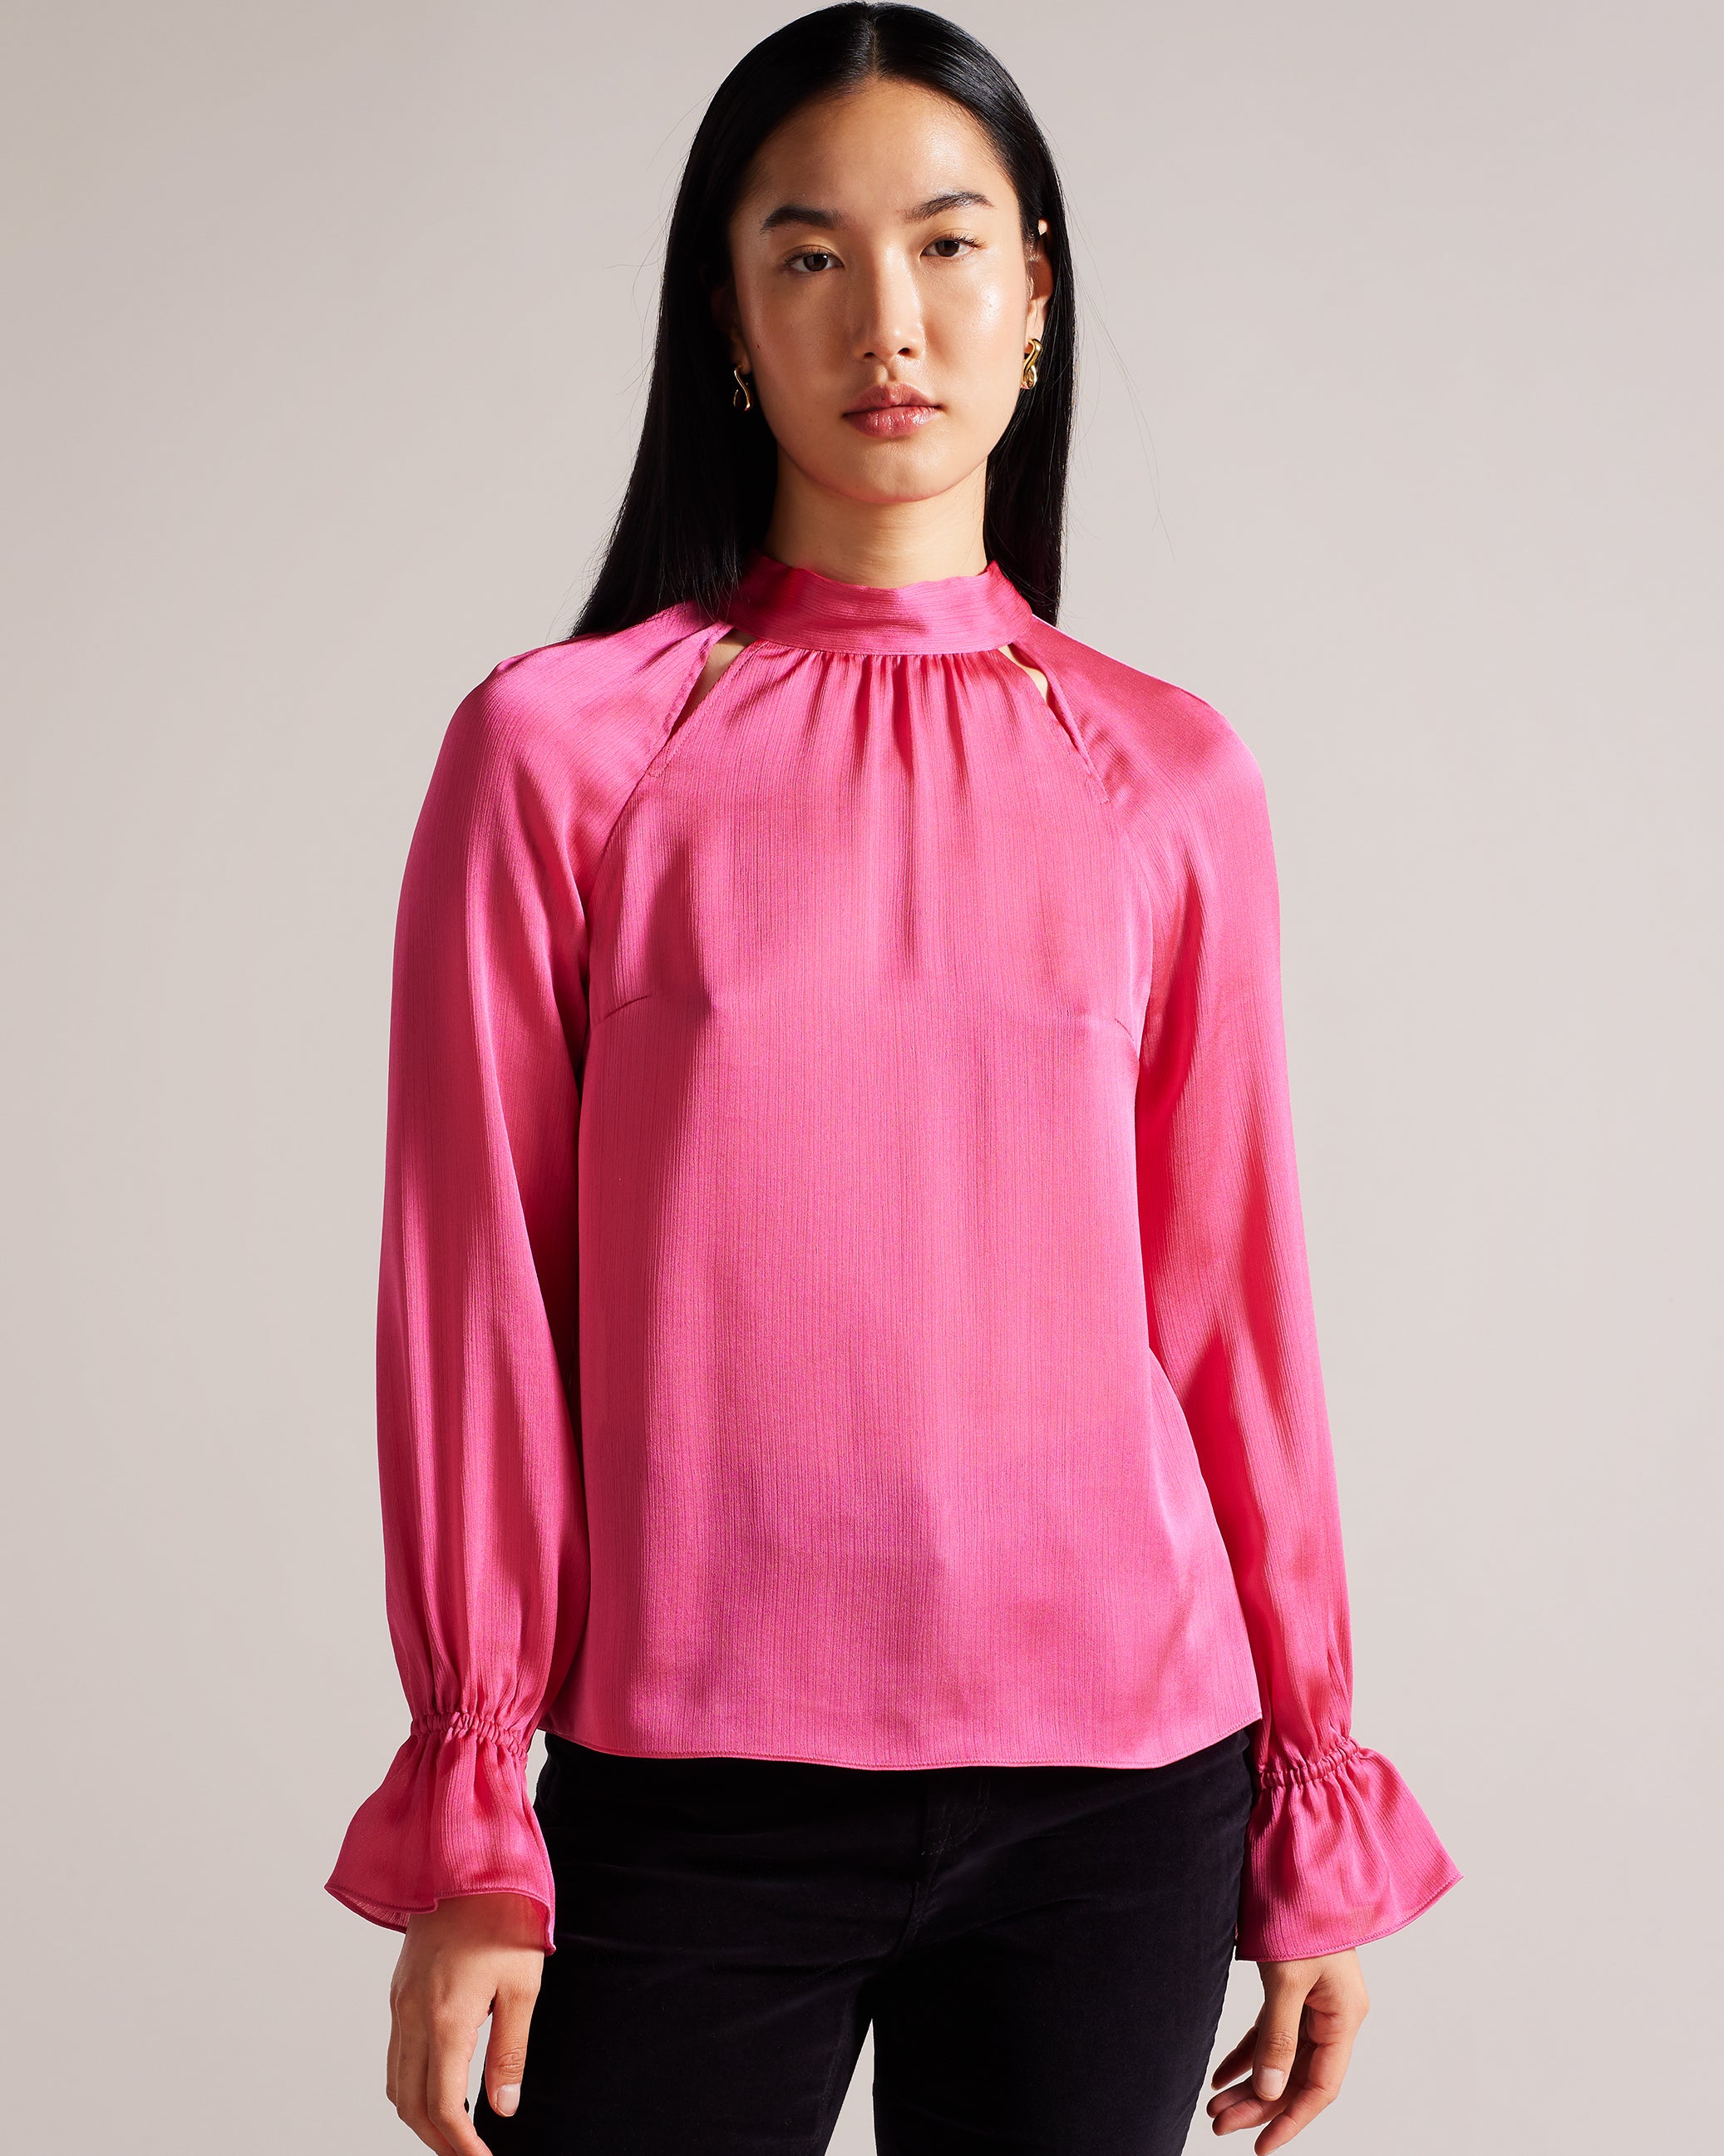 Women's Tops & T-Shirts – Page 2 – Ted Baker, Canada